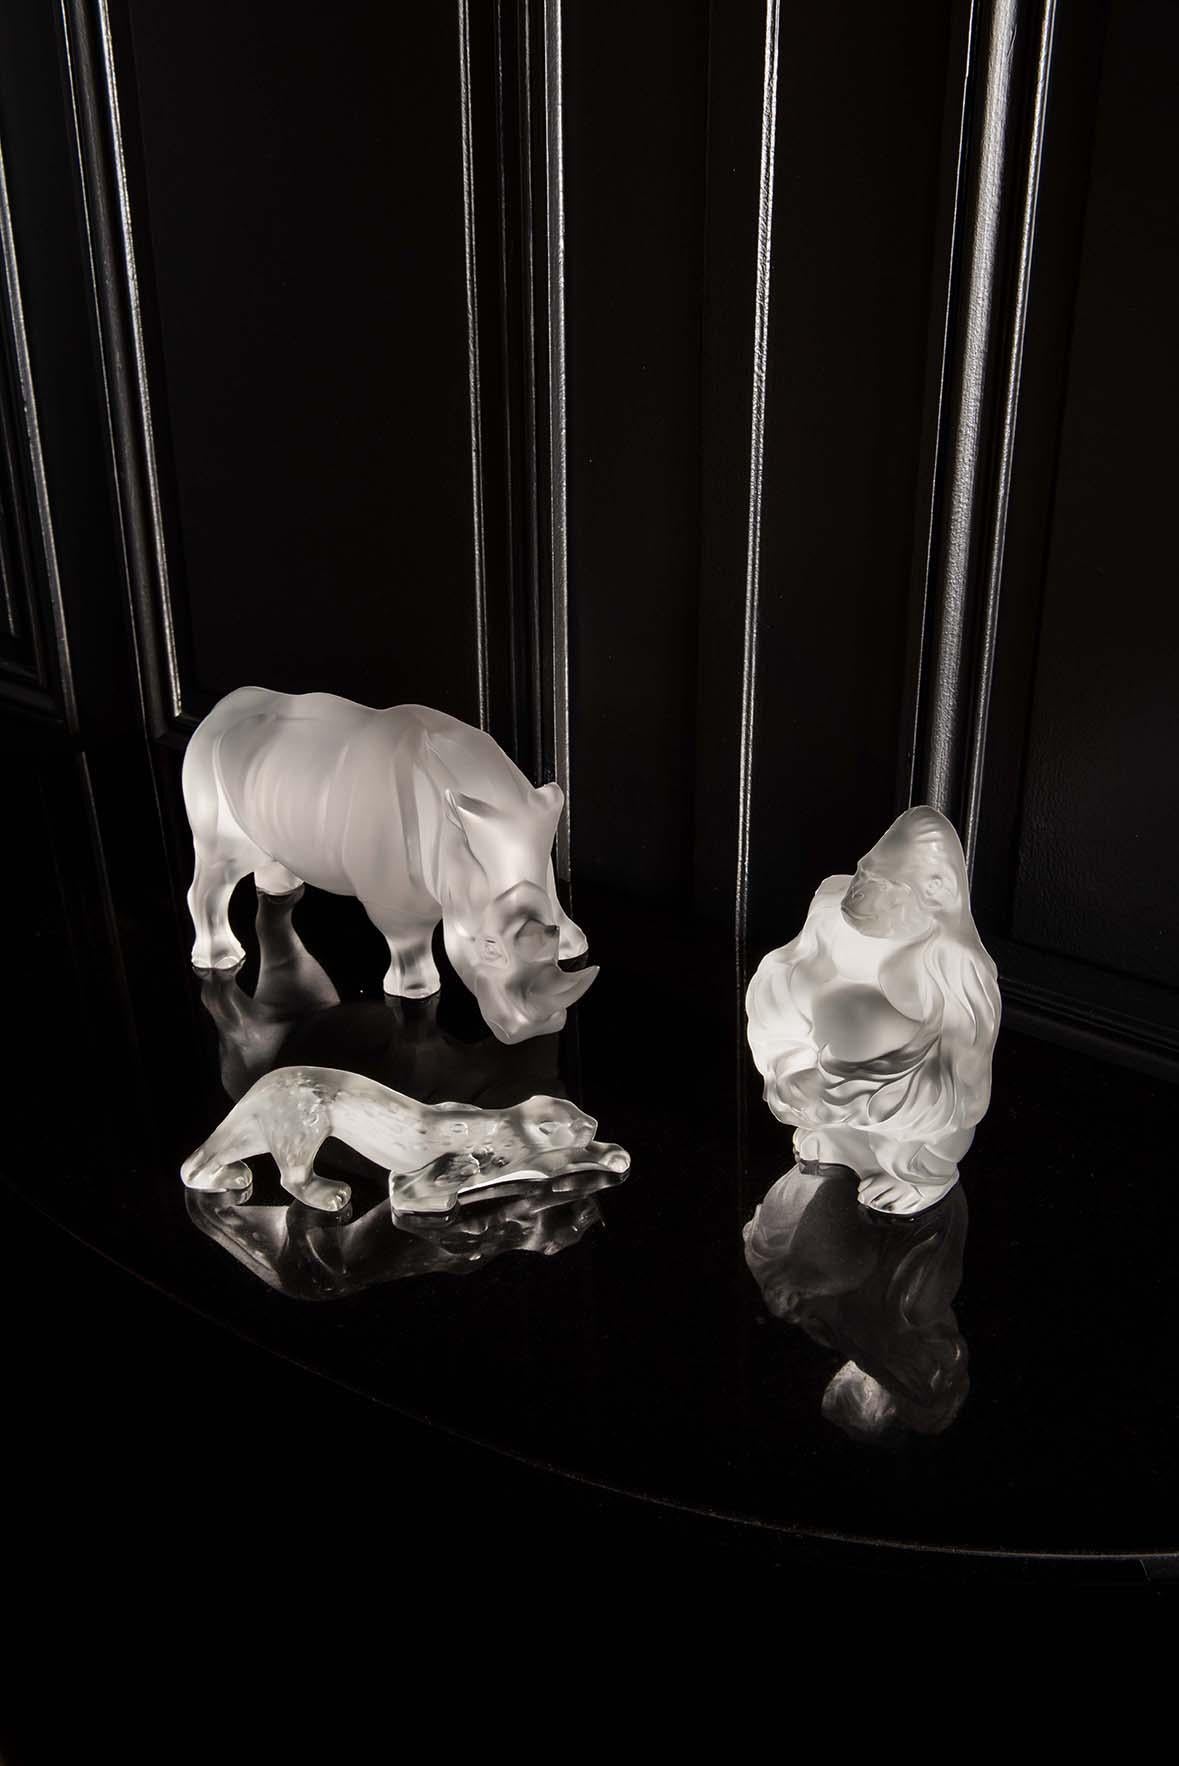 Inspired by the fauna of the jungle, new wild animal sculptures have been added to the Lalique bestiary. Lalique's signature contrast of satin finished and repolished crystal contrasts the design of this symbol of strength and power.